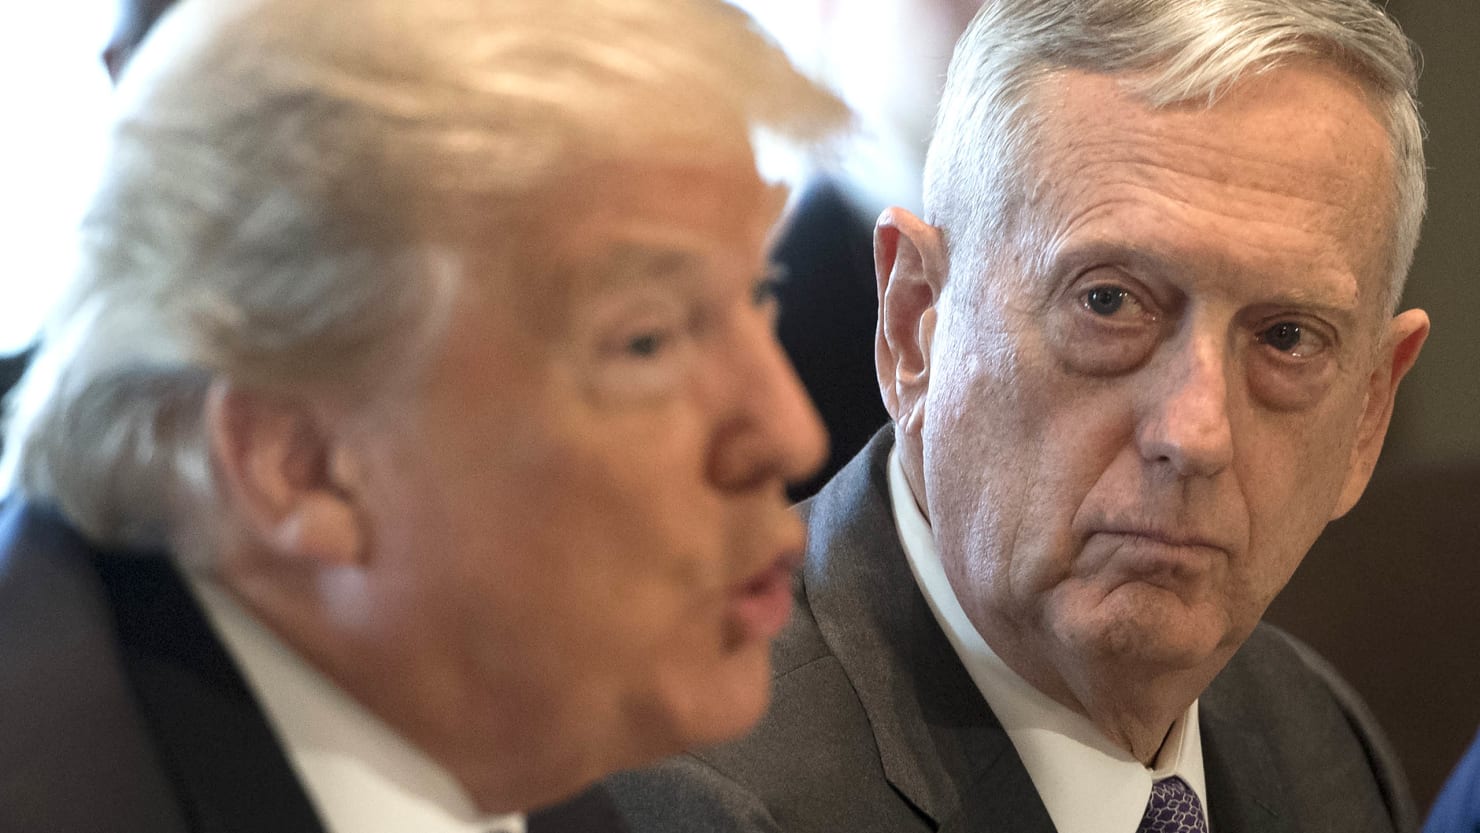 US Defence Secretary Jim Mattis resigns over differences with Trump